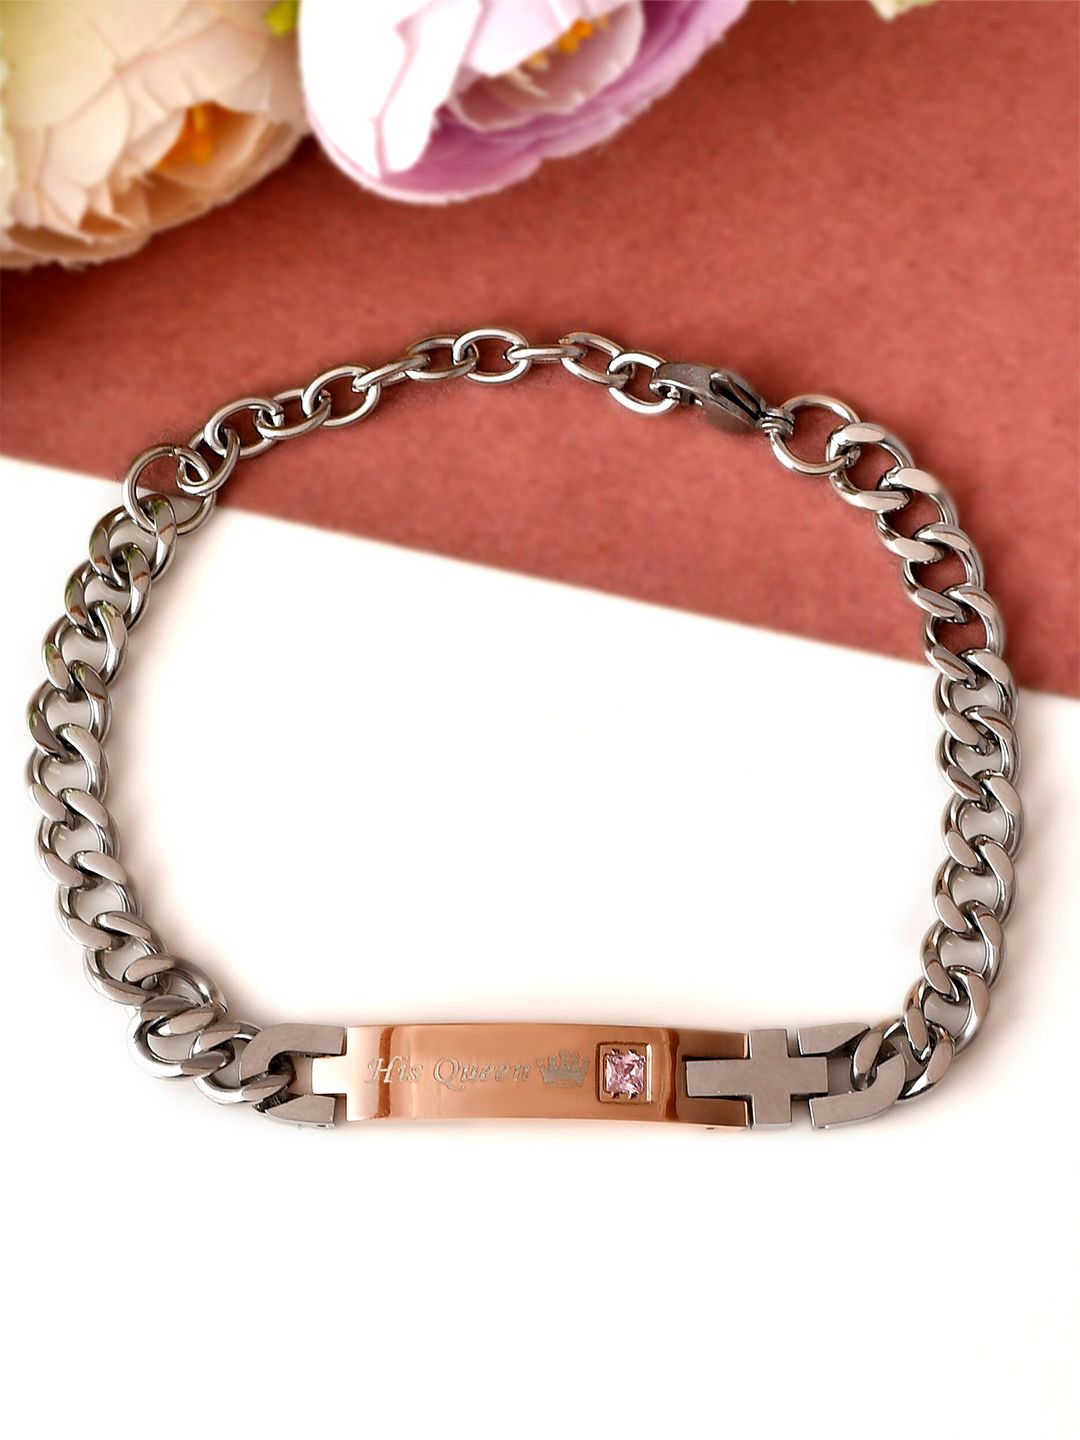 AQUASTREET Women Silver-Toned & Copper-Toned Silver-Plated Charm Inscribed Bracelet Price in India